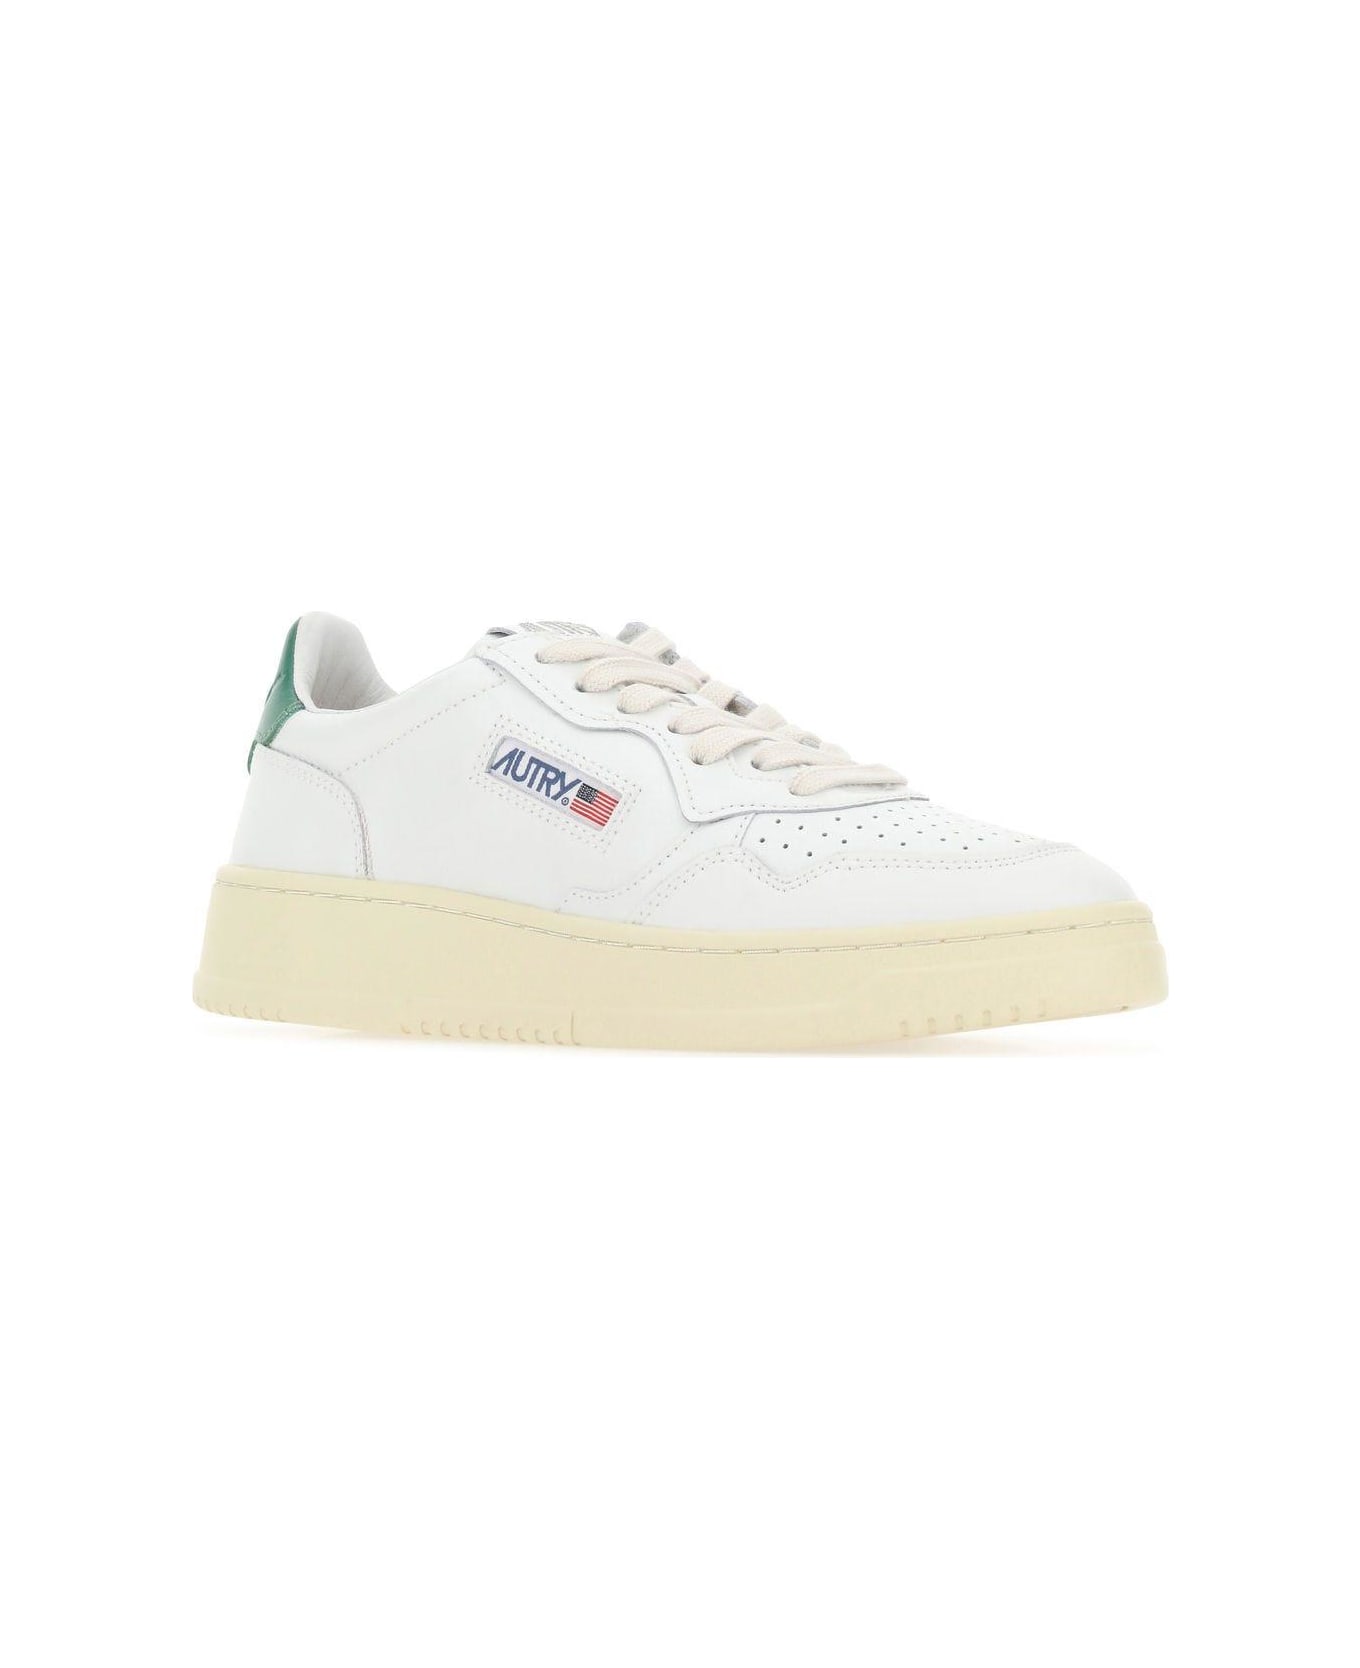 Autry White Leather Medalist Sneakers - WHITE スニーカー